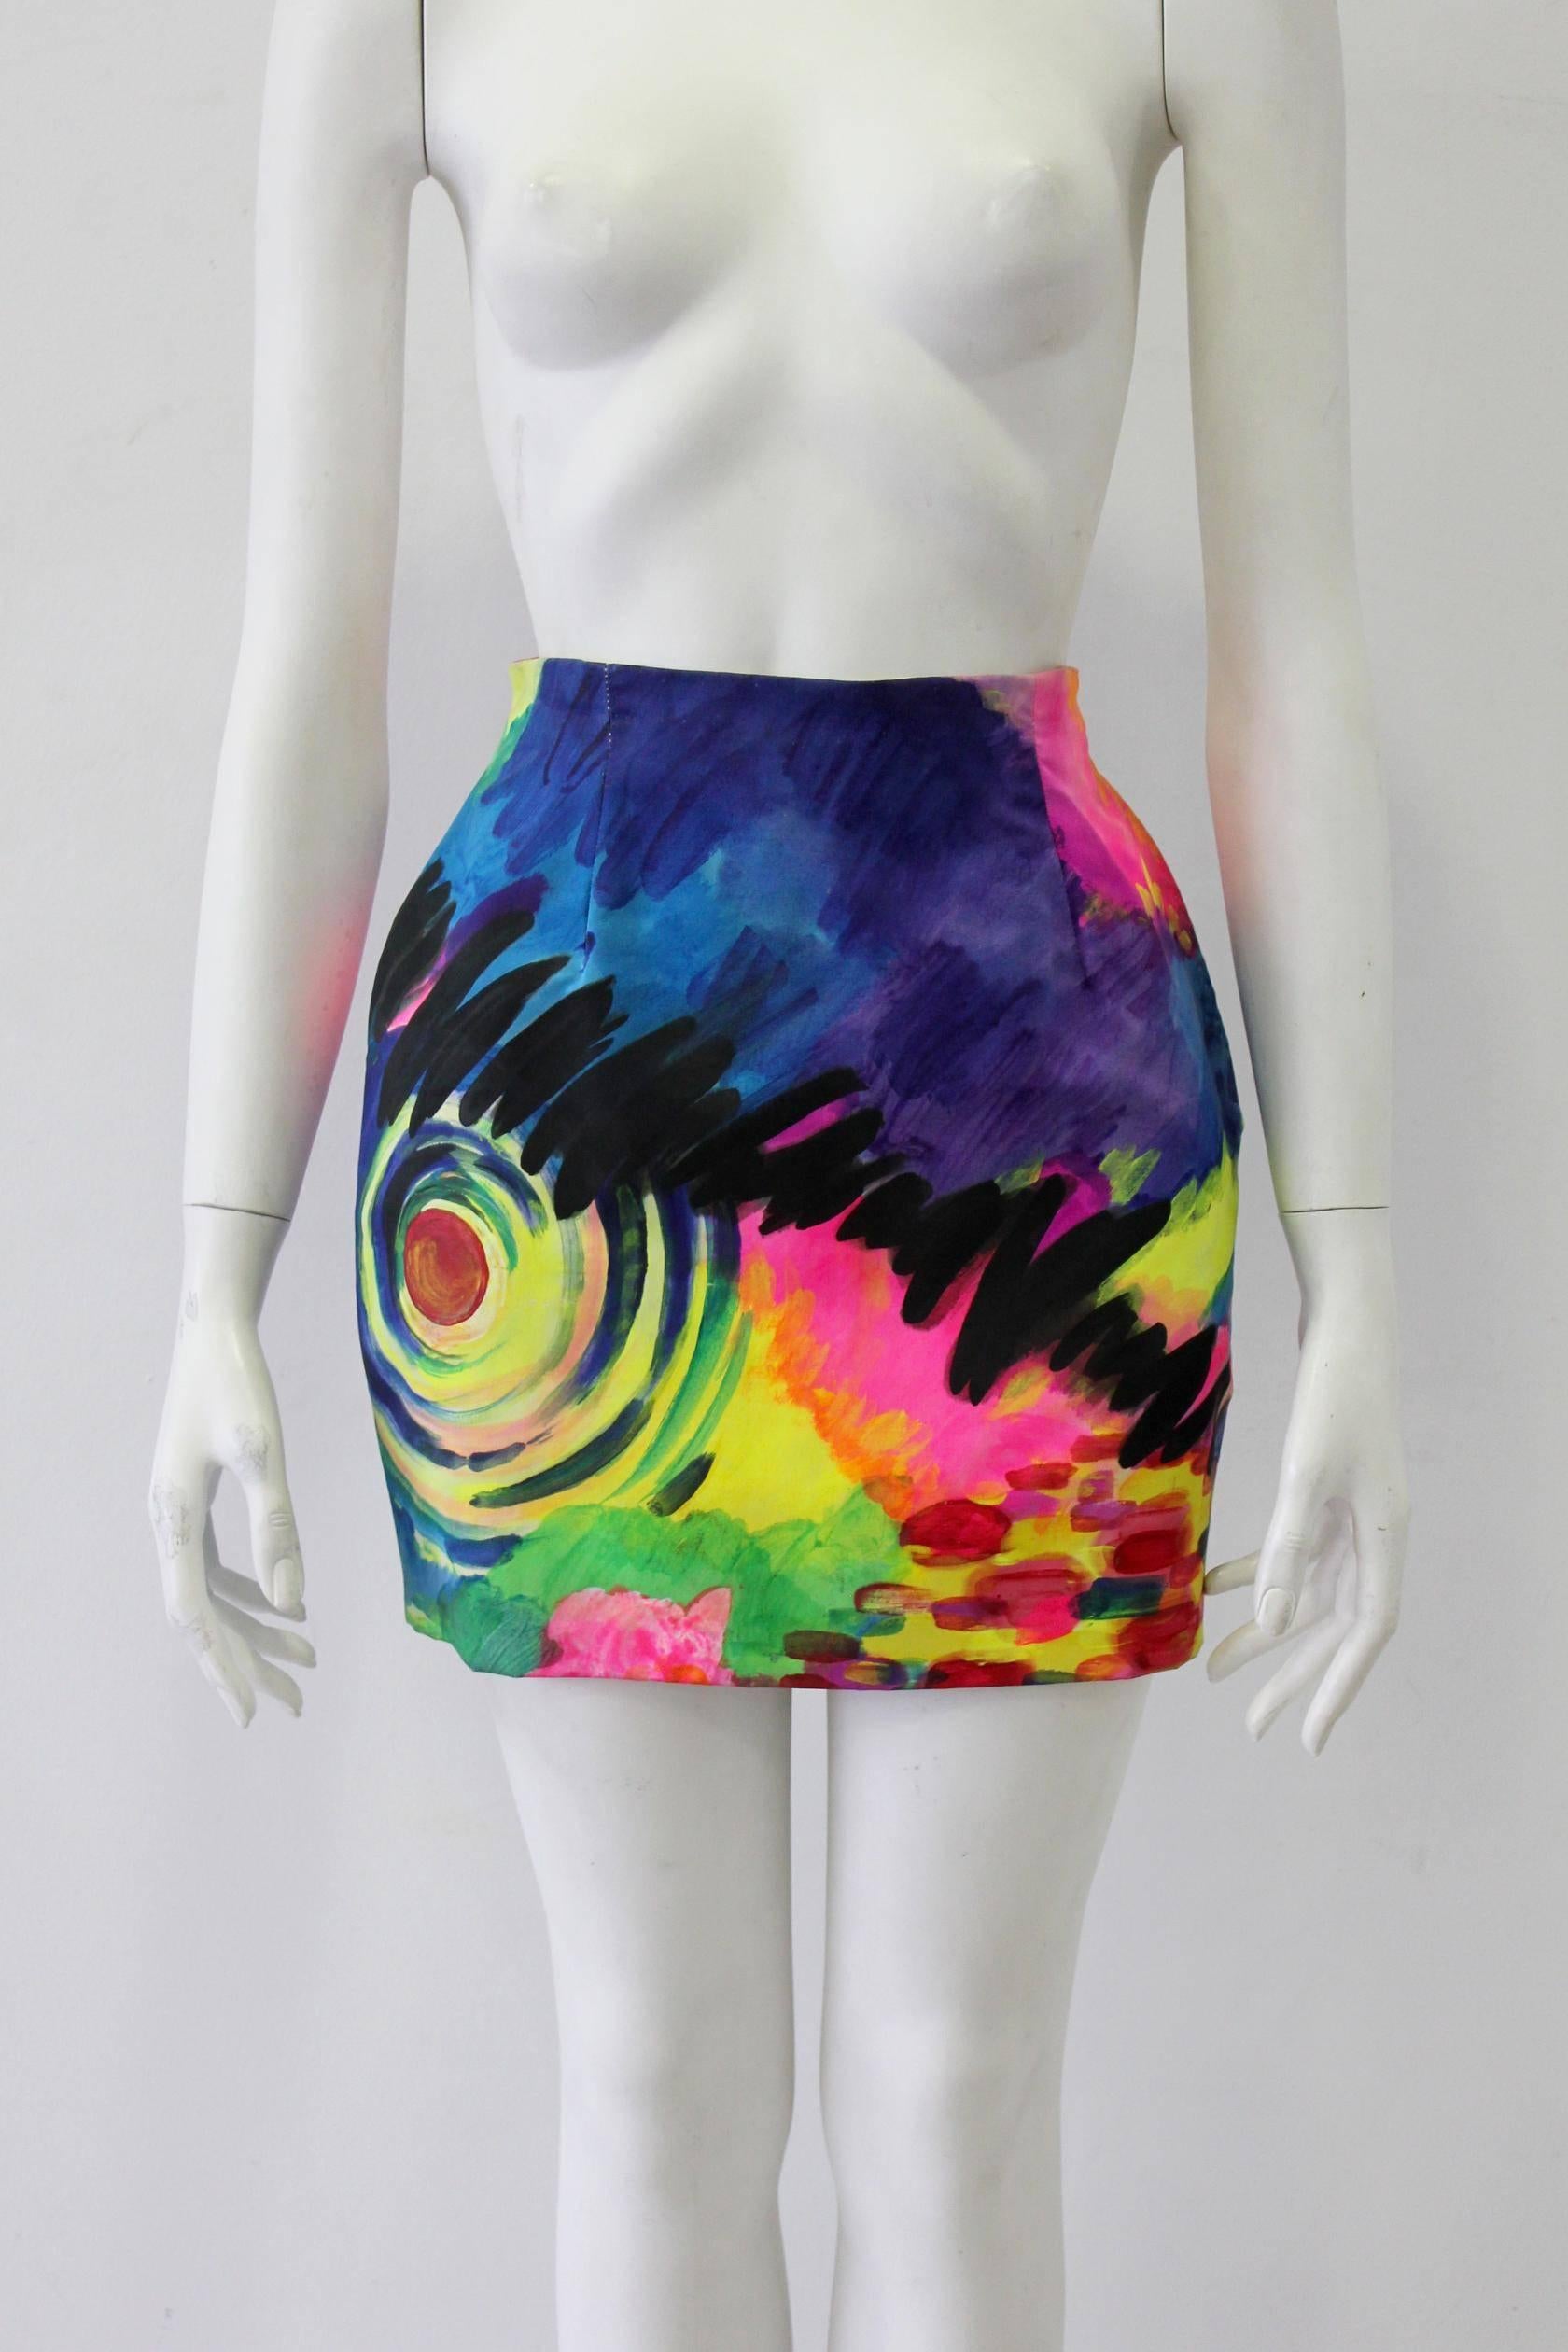 Unique Hand Painted Prototype Canvas Skirt From The  Atelier Of Gianni Versace,
For Creating The Printing Collection Of Spring- Summer 1992
It's An Art Piece  ,Collectors Item. 
